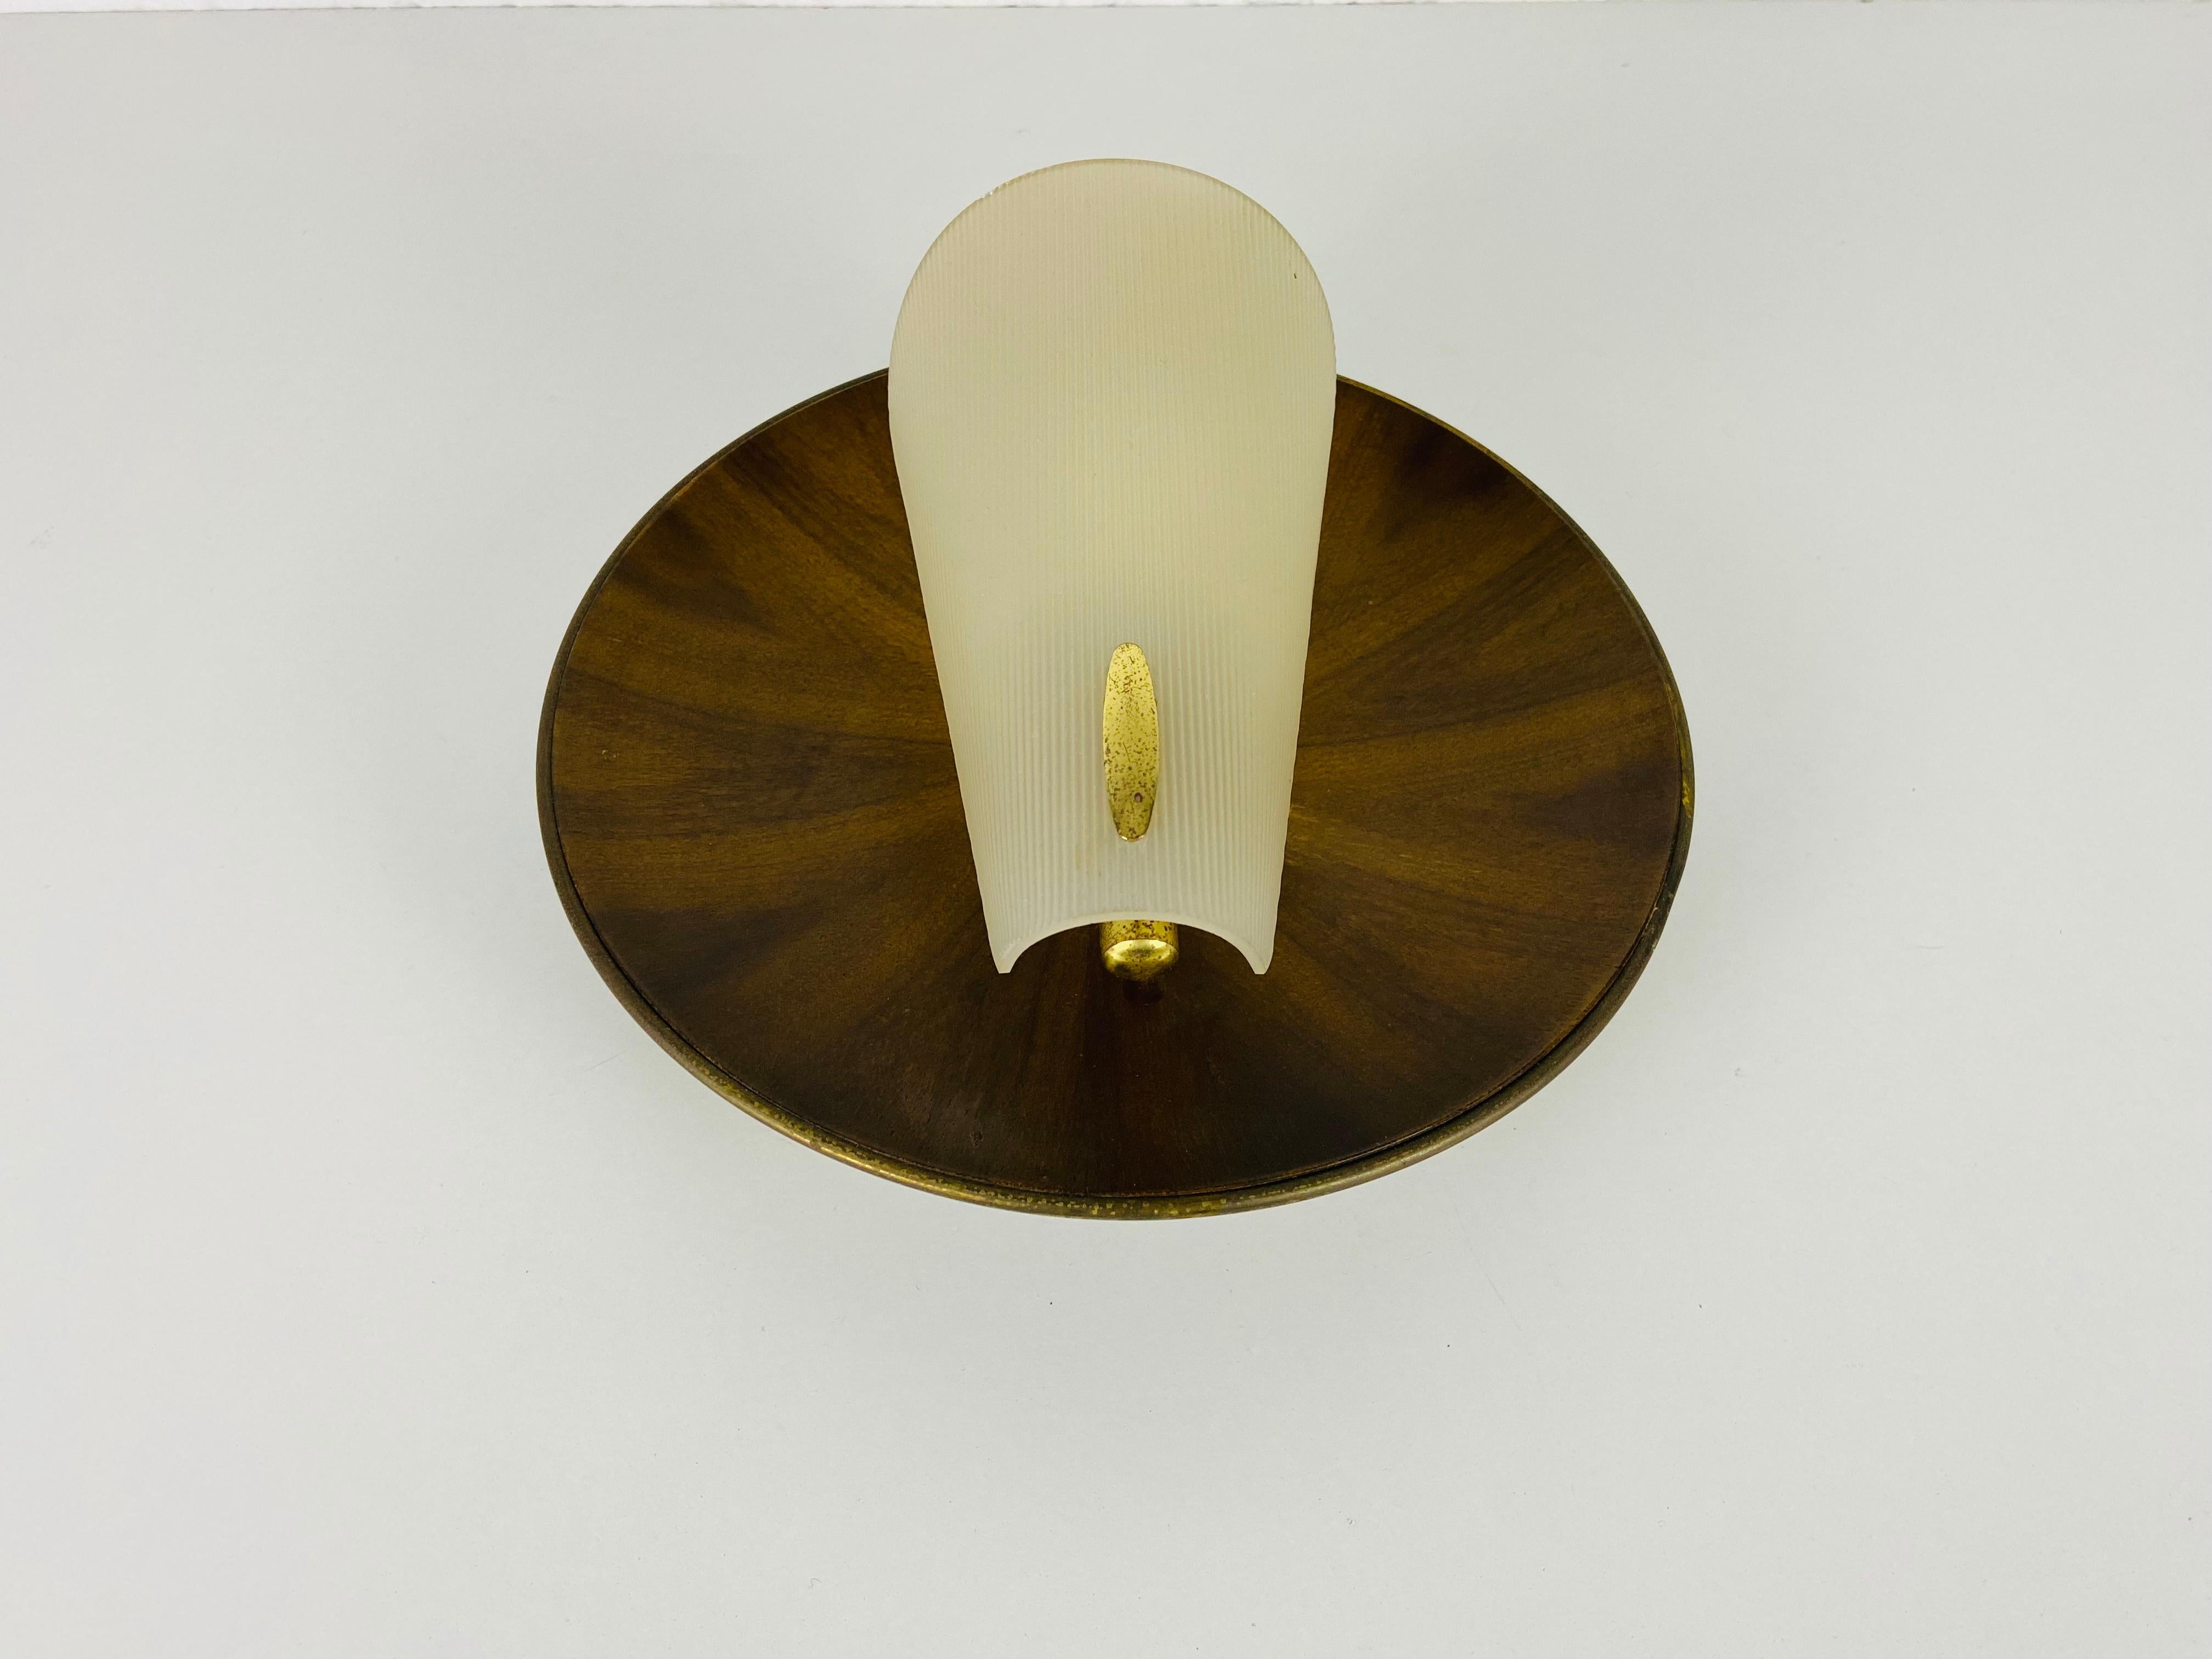 Midcentury Teak and Plexi Glass Wall Lamp in the style of Stilnovo, Italy For Sale 1